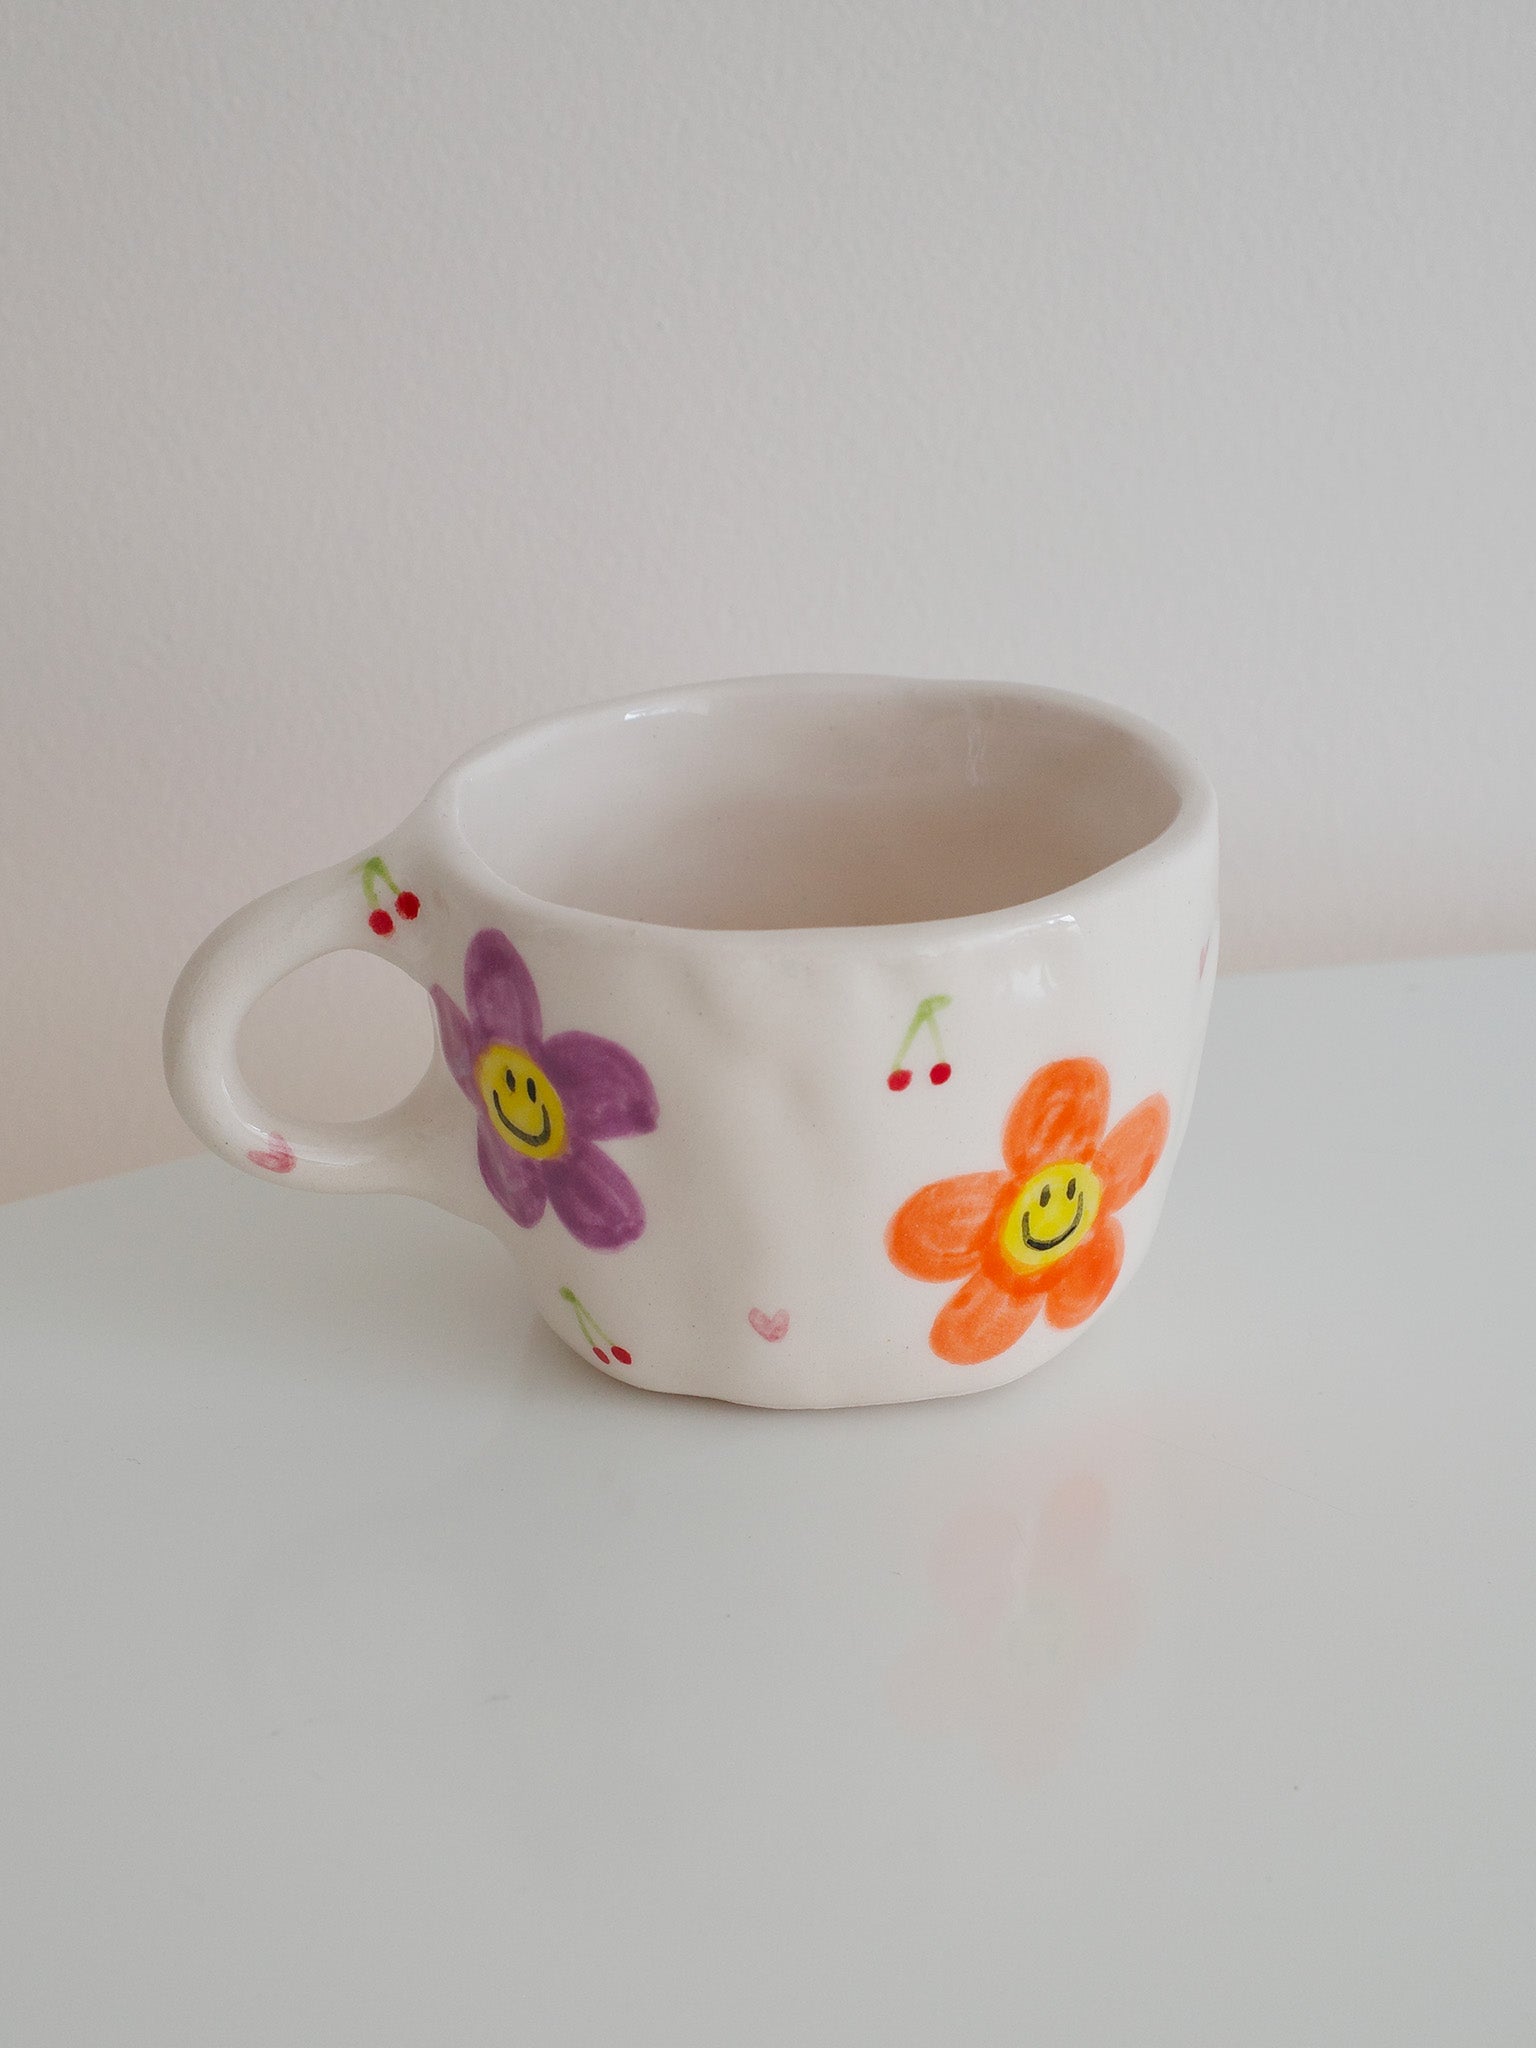 Today is Your Day Daisy Mug